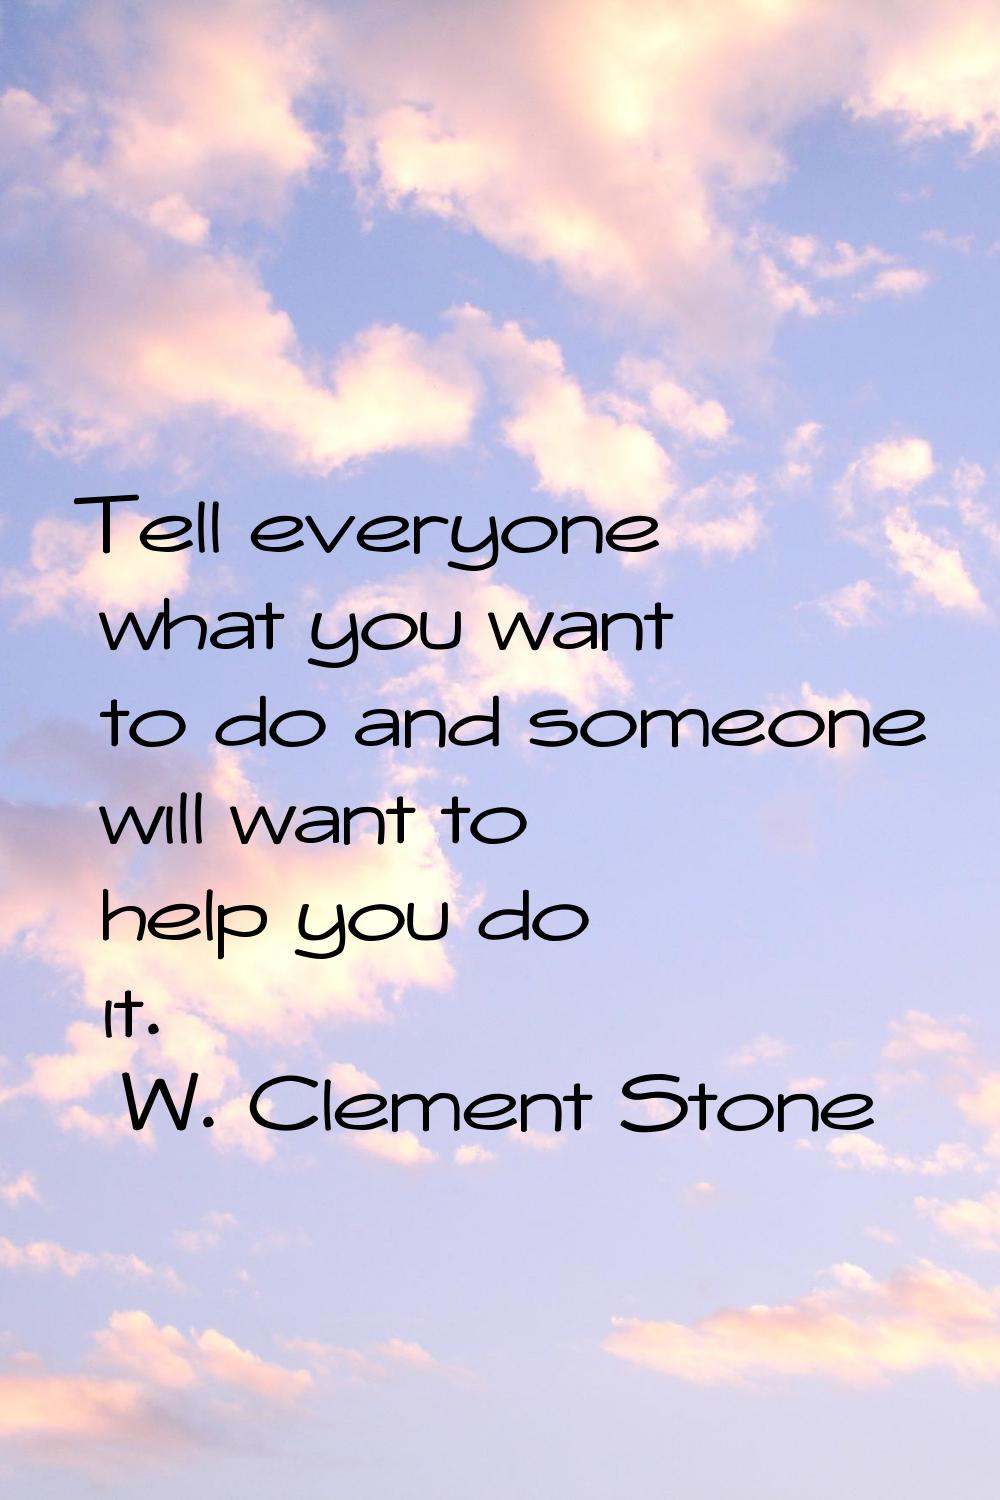 Tell everyone what you want to do and someone will want to help you do it.